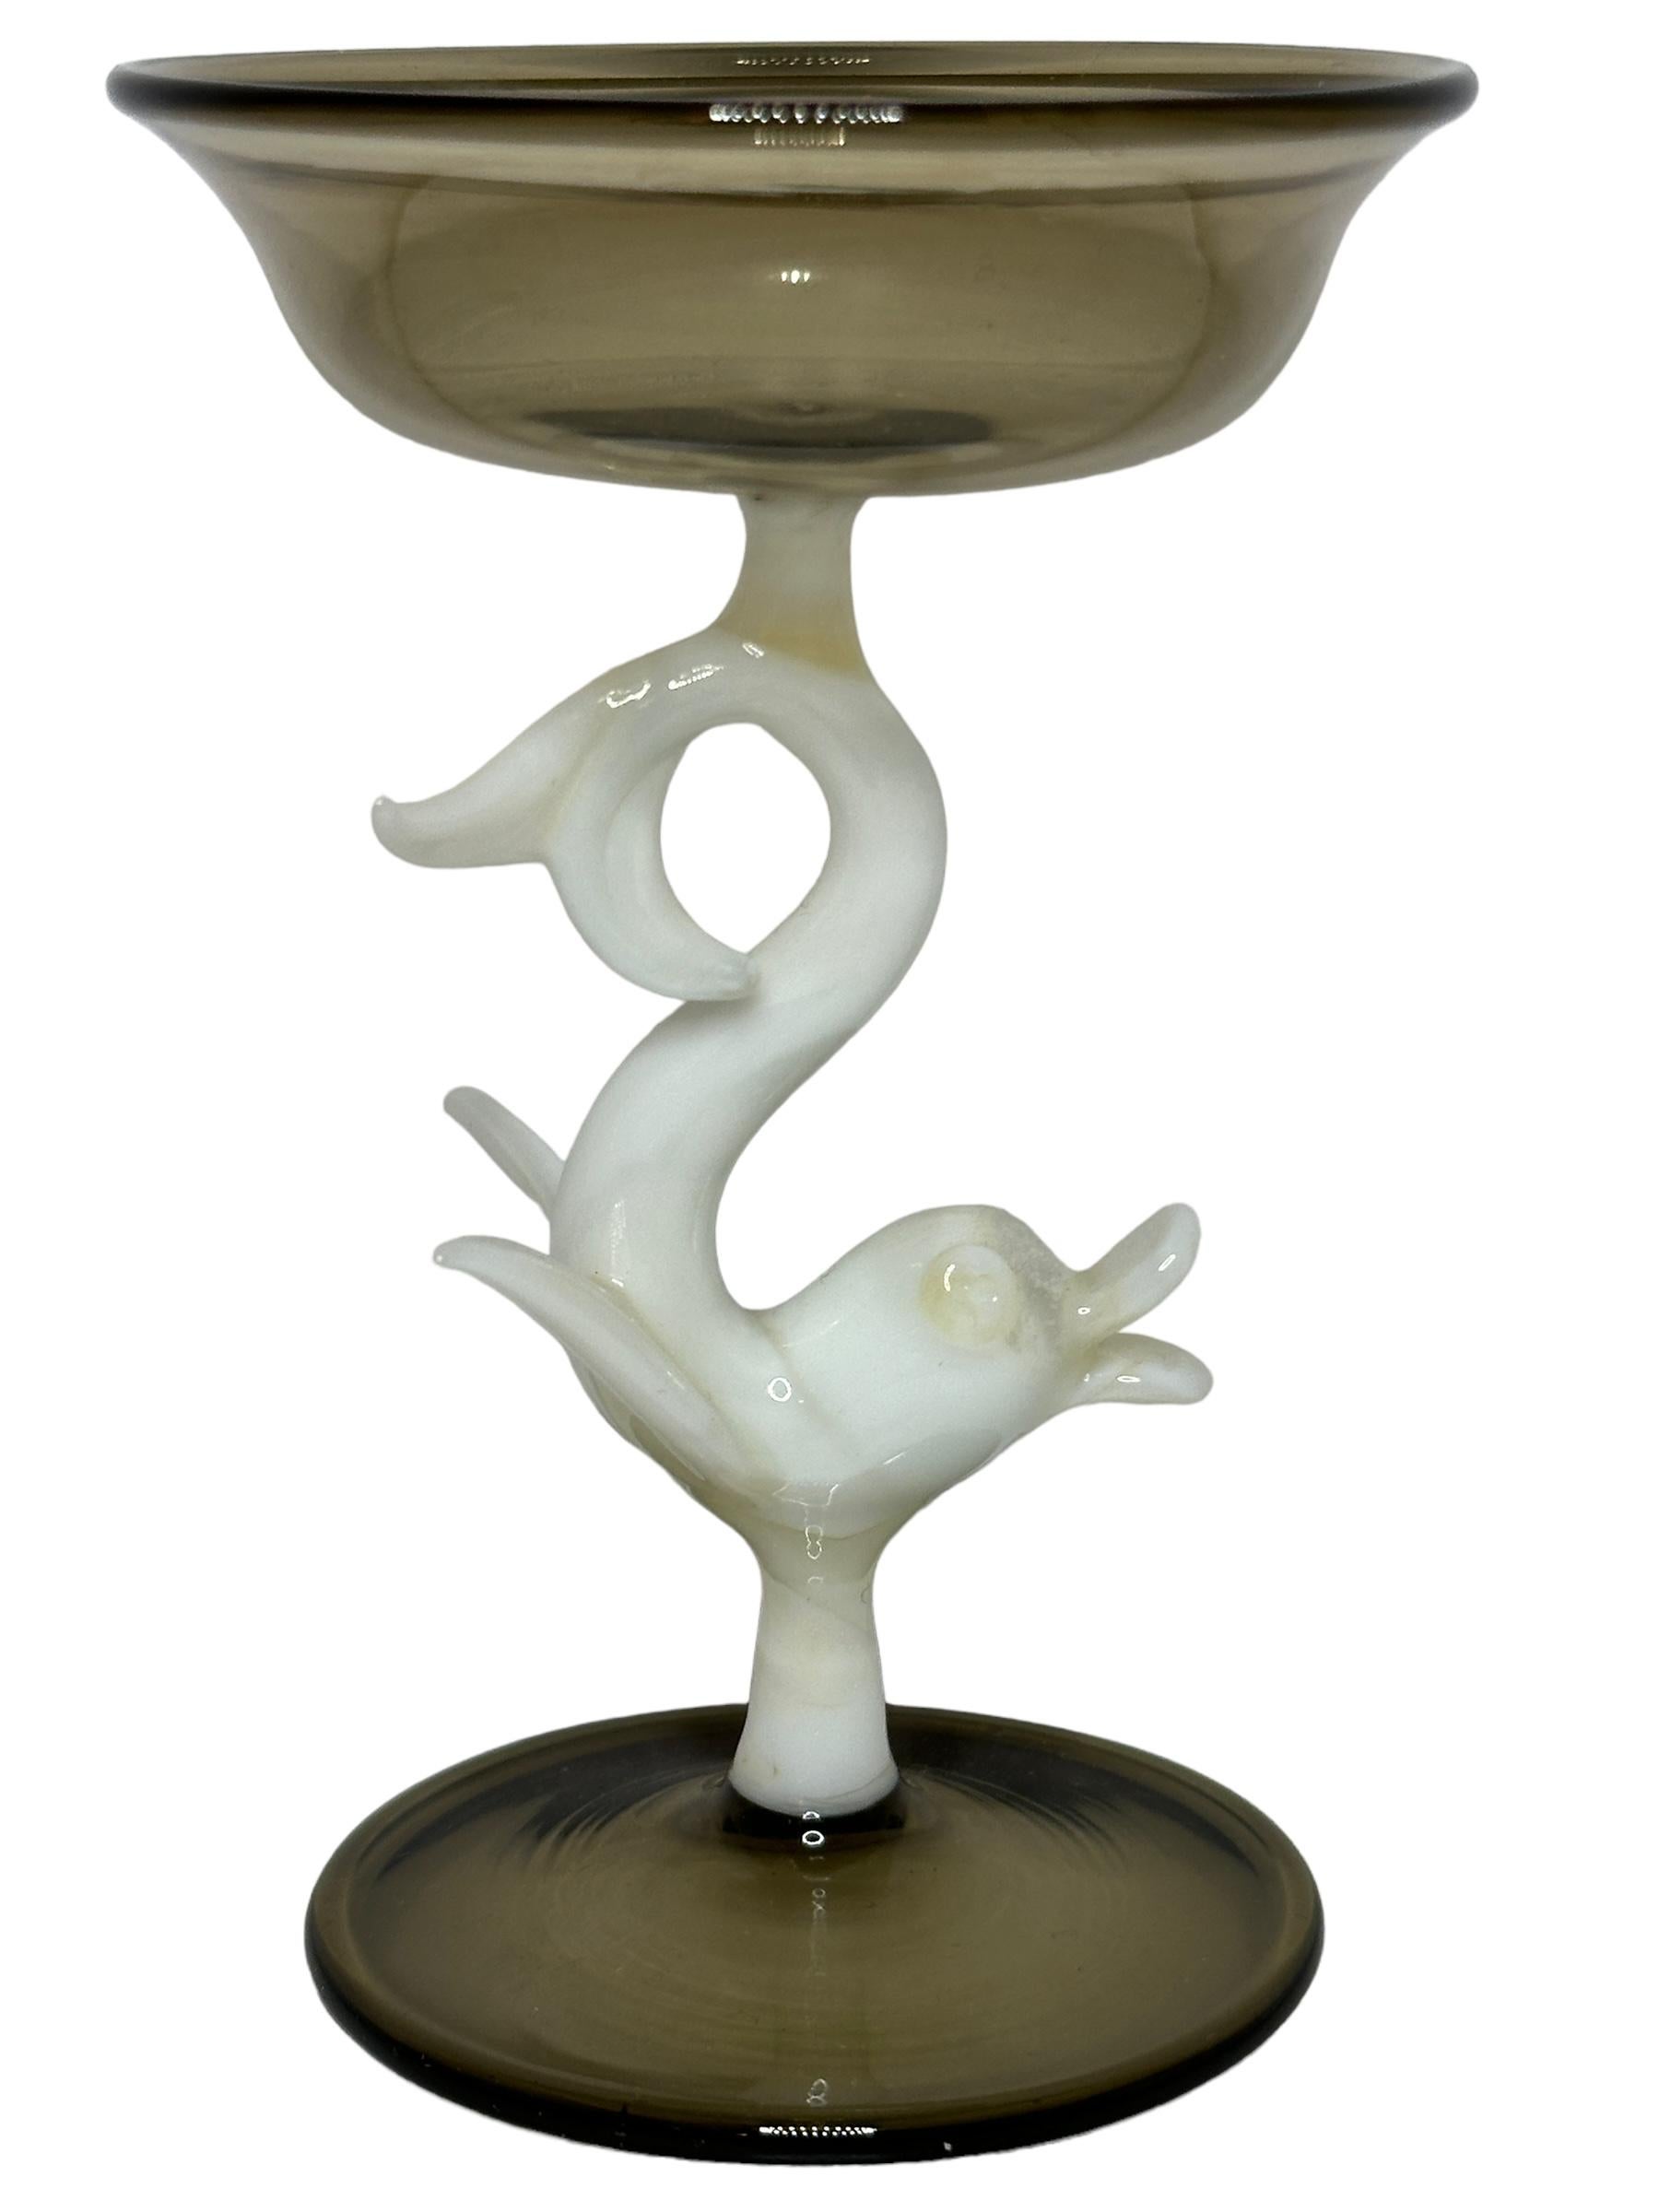 This is a beautiful single vintage stemmed liqueur glass from Austria. It features a dolphin fish shaft and is Bimini art style. The glass has a wonderful design, the stem depicts a dolphin fish in white color. The base and the top is a beautiful